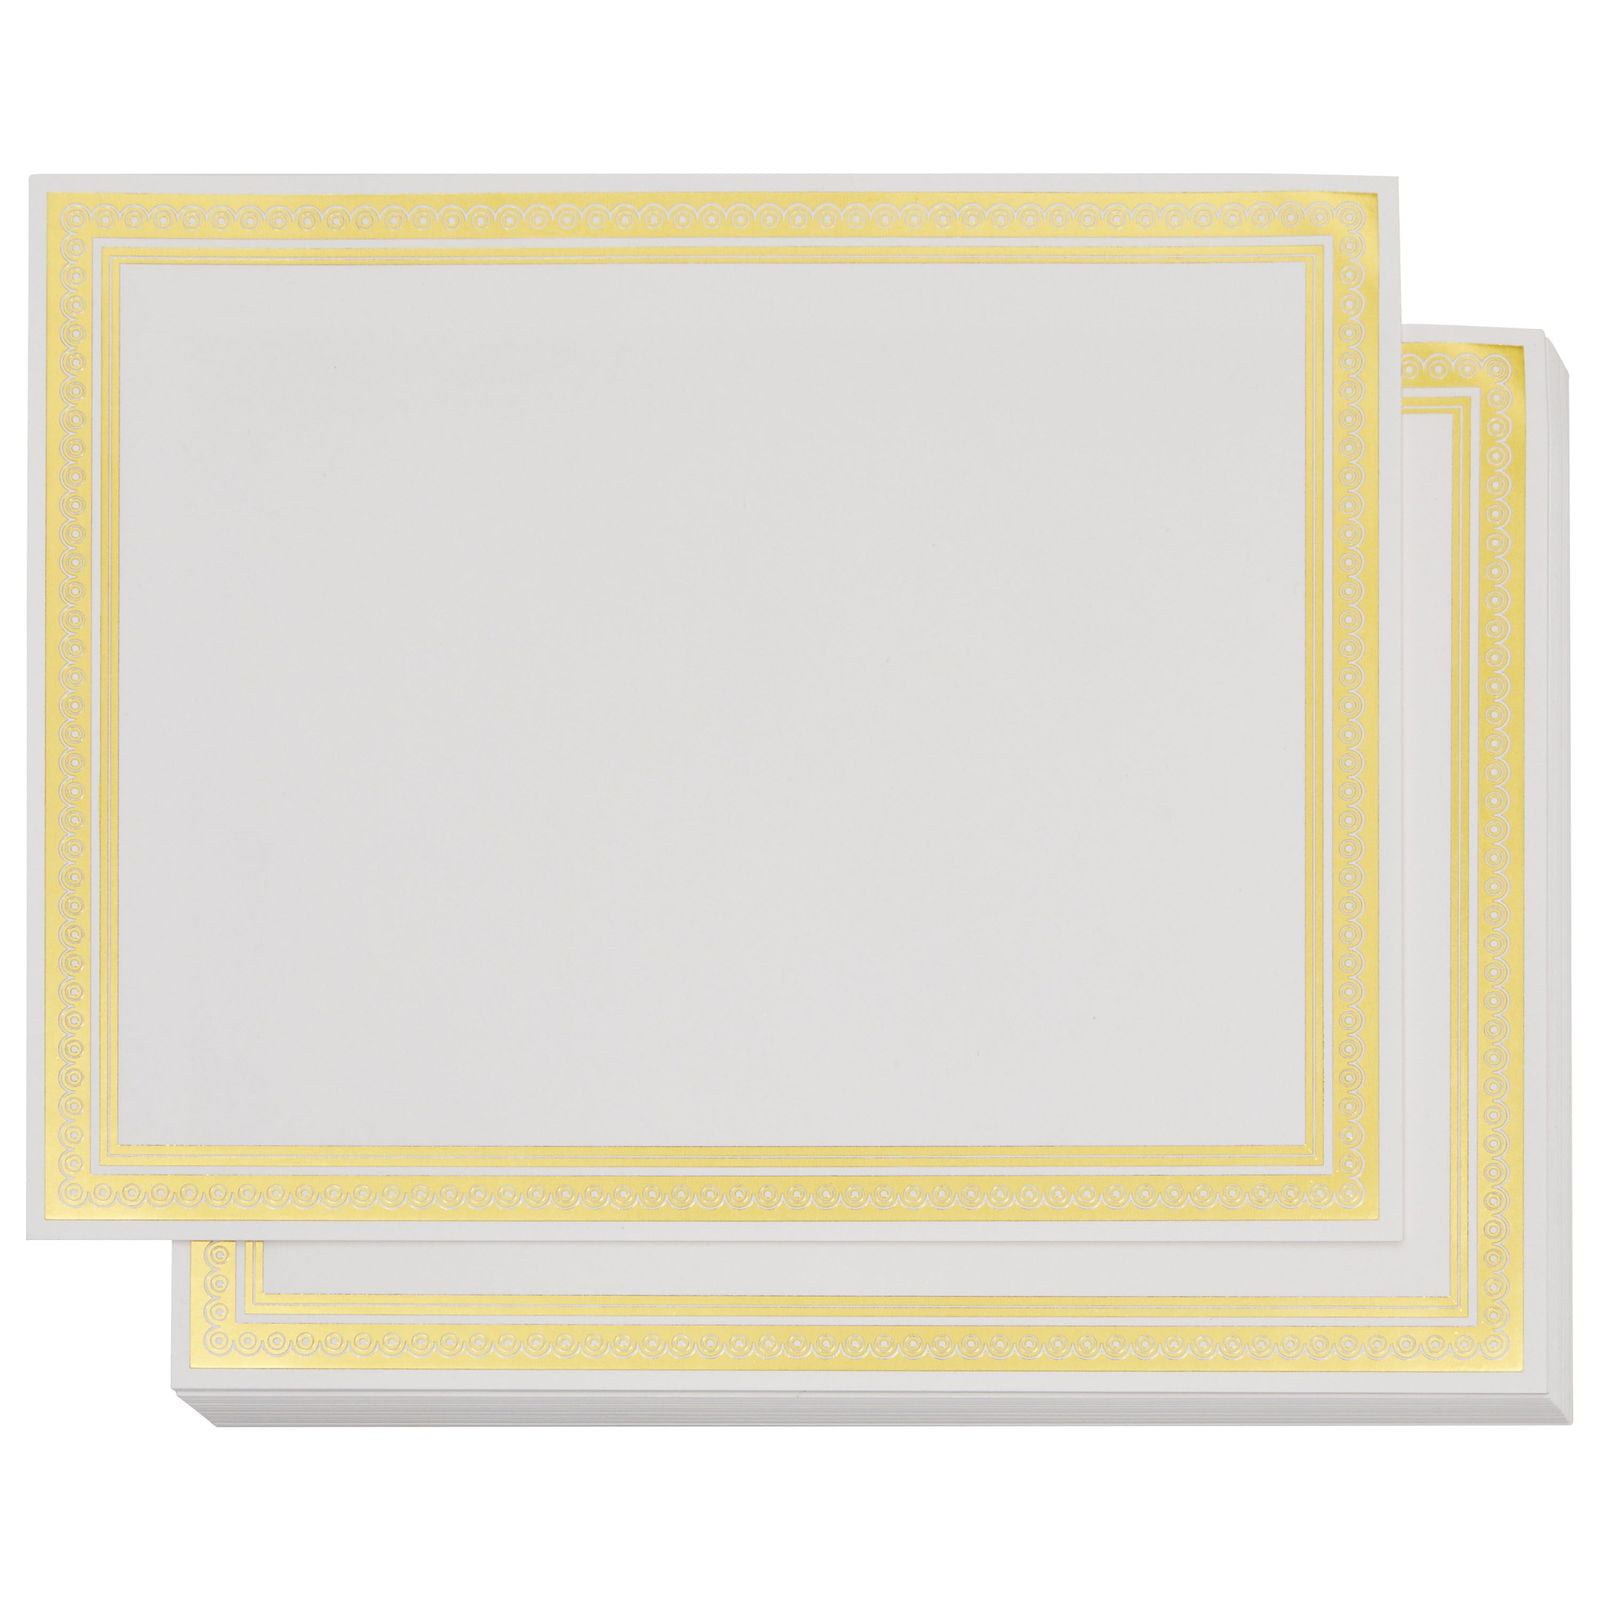 8.5 x 11 Inches White Gol Geographics Optima Gold Certificates with Foil Seals 